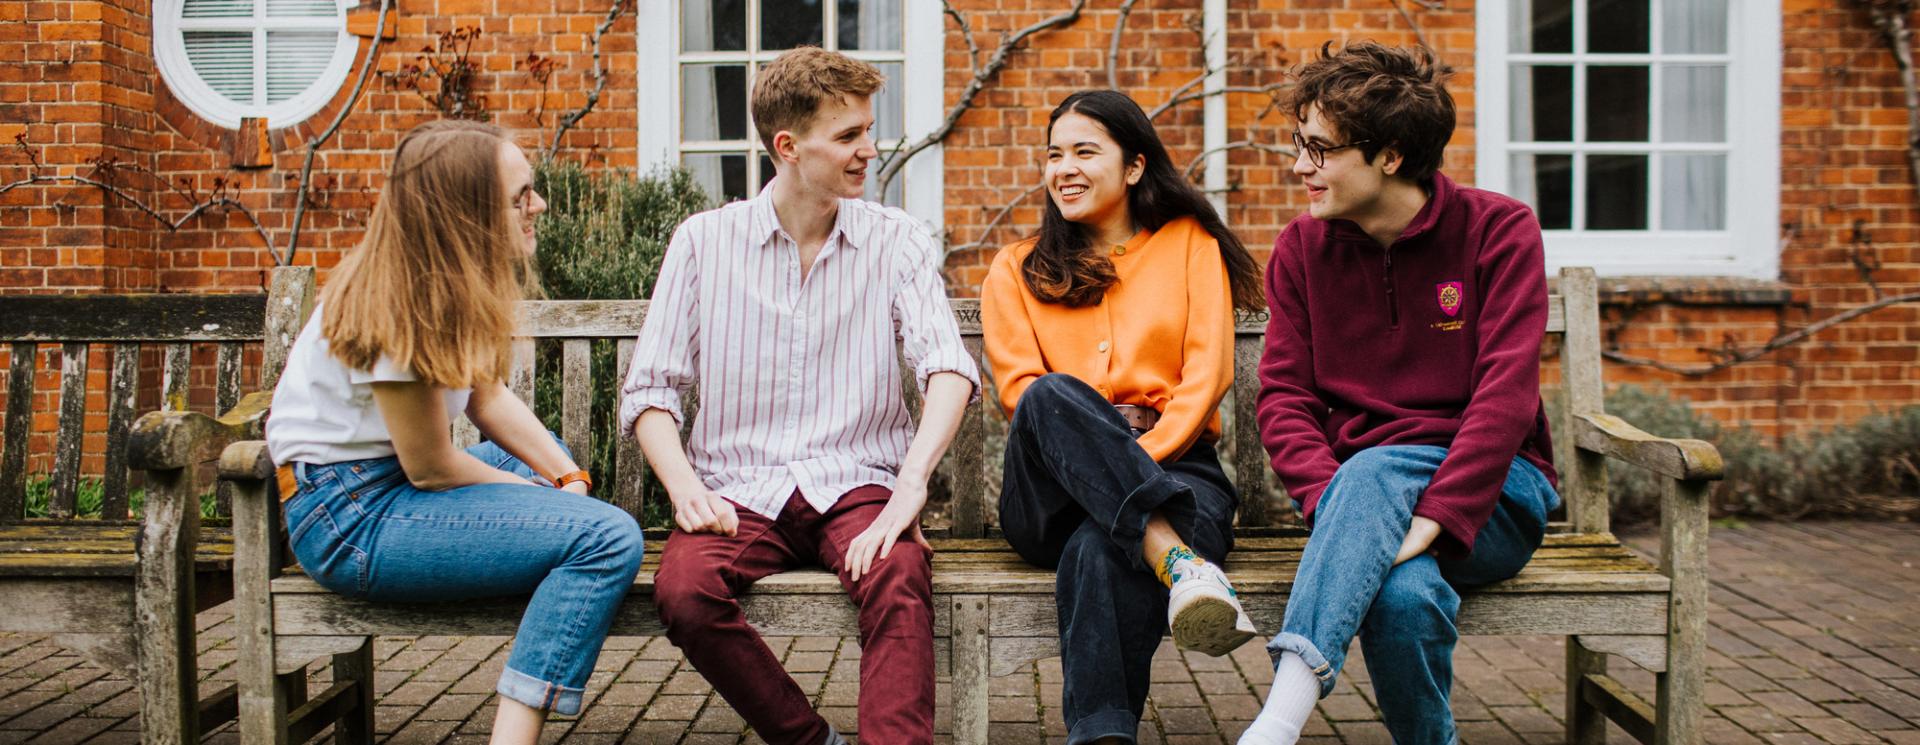 Group of St Catharine's student on a bench